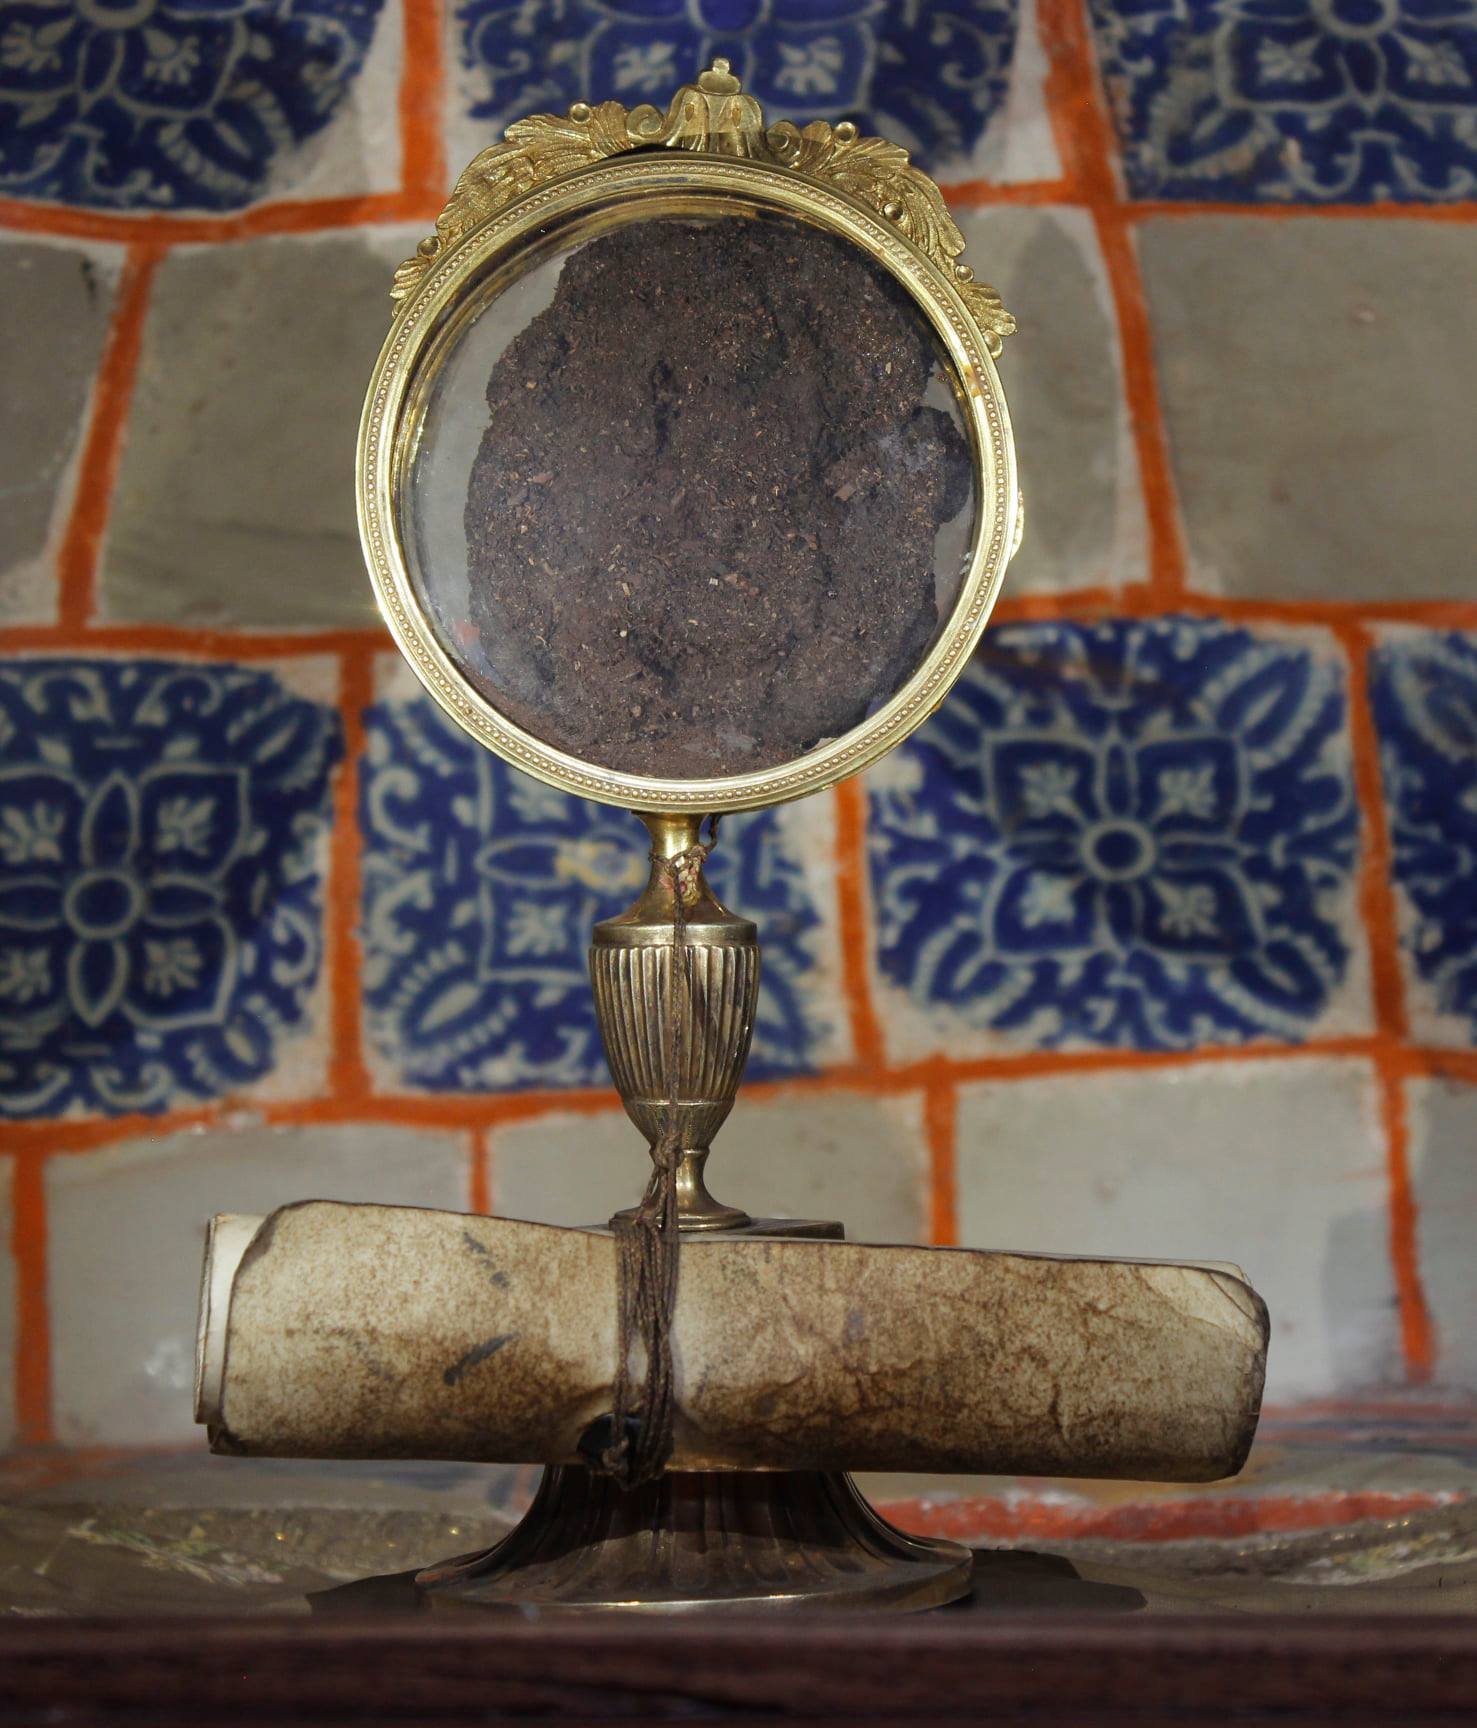 catholic relic of a heart of a saint